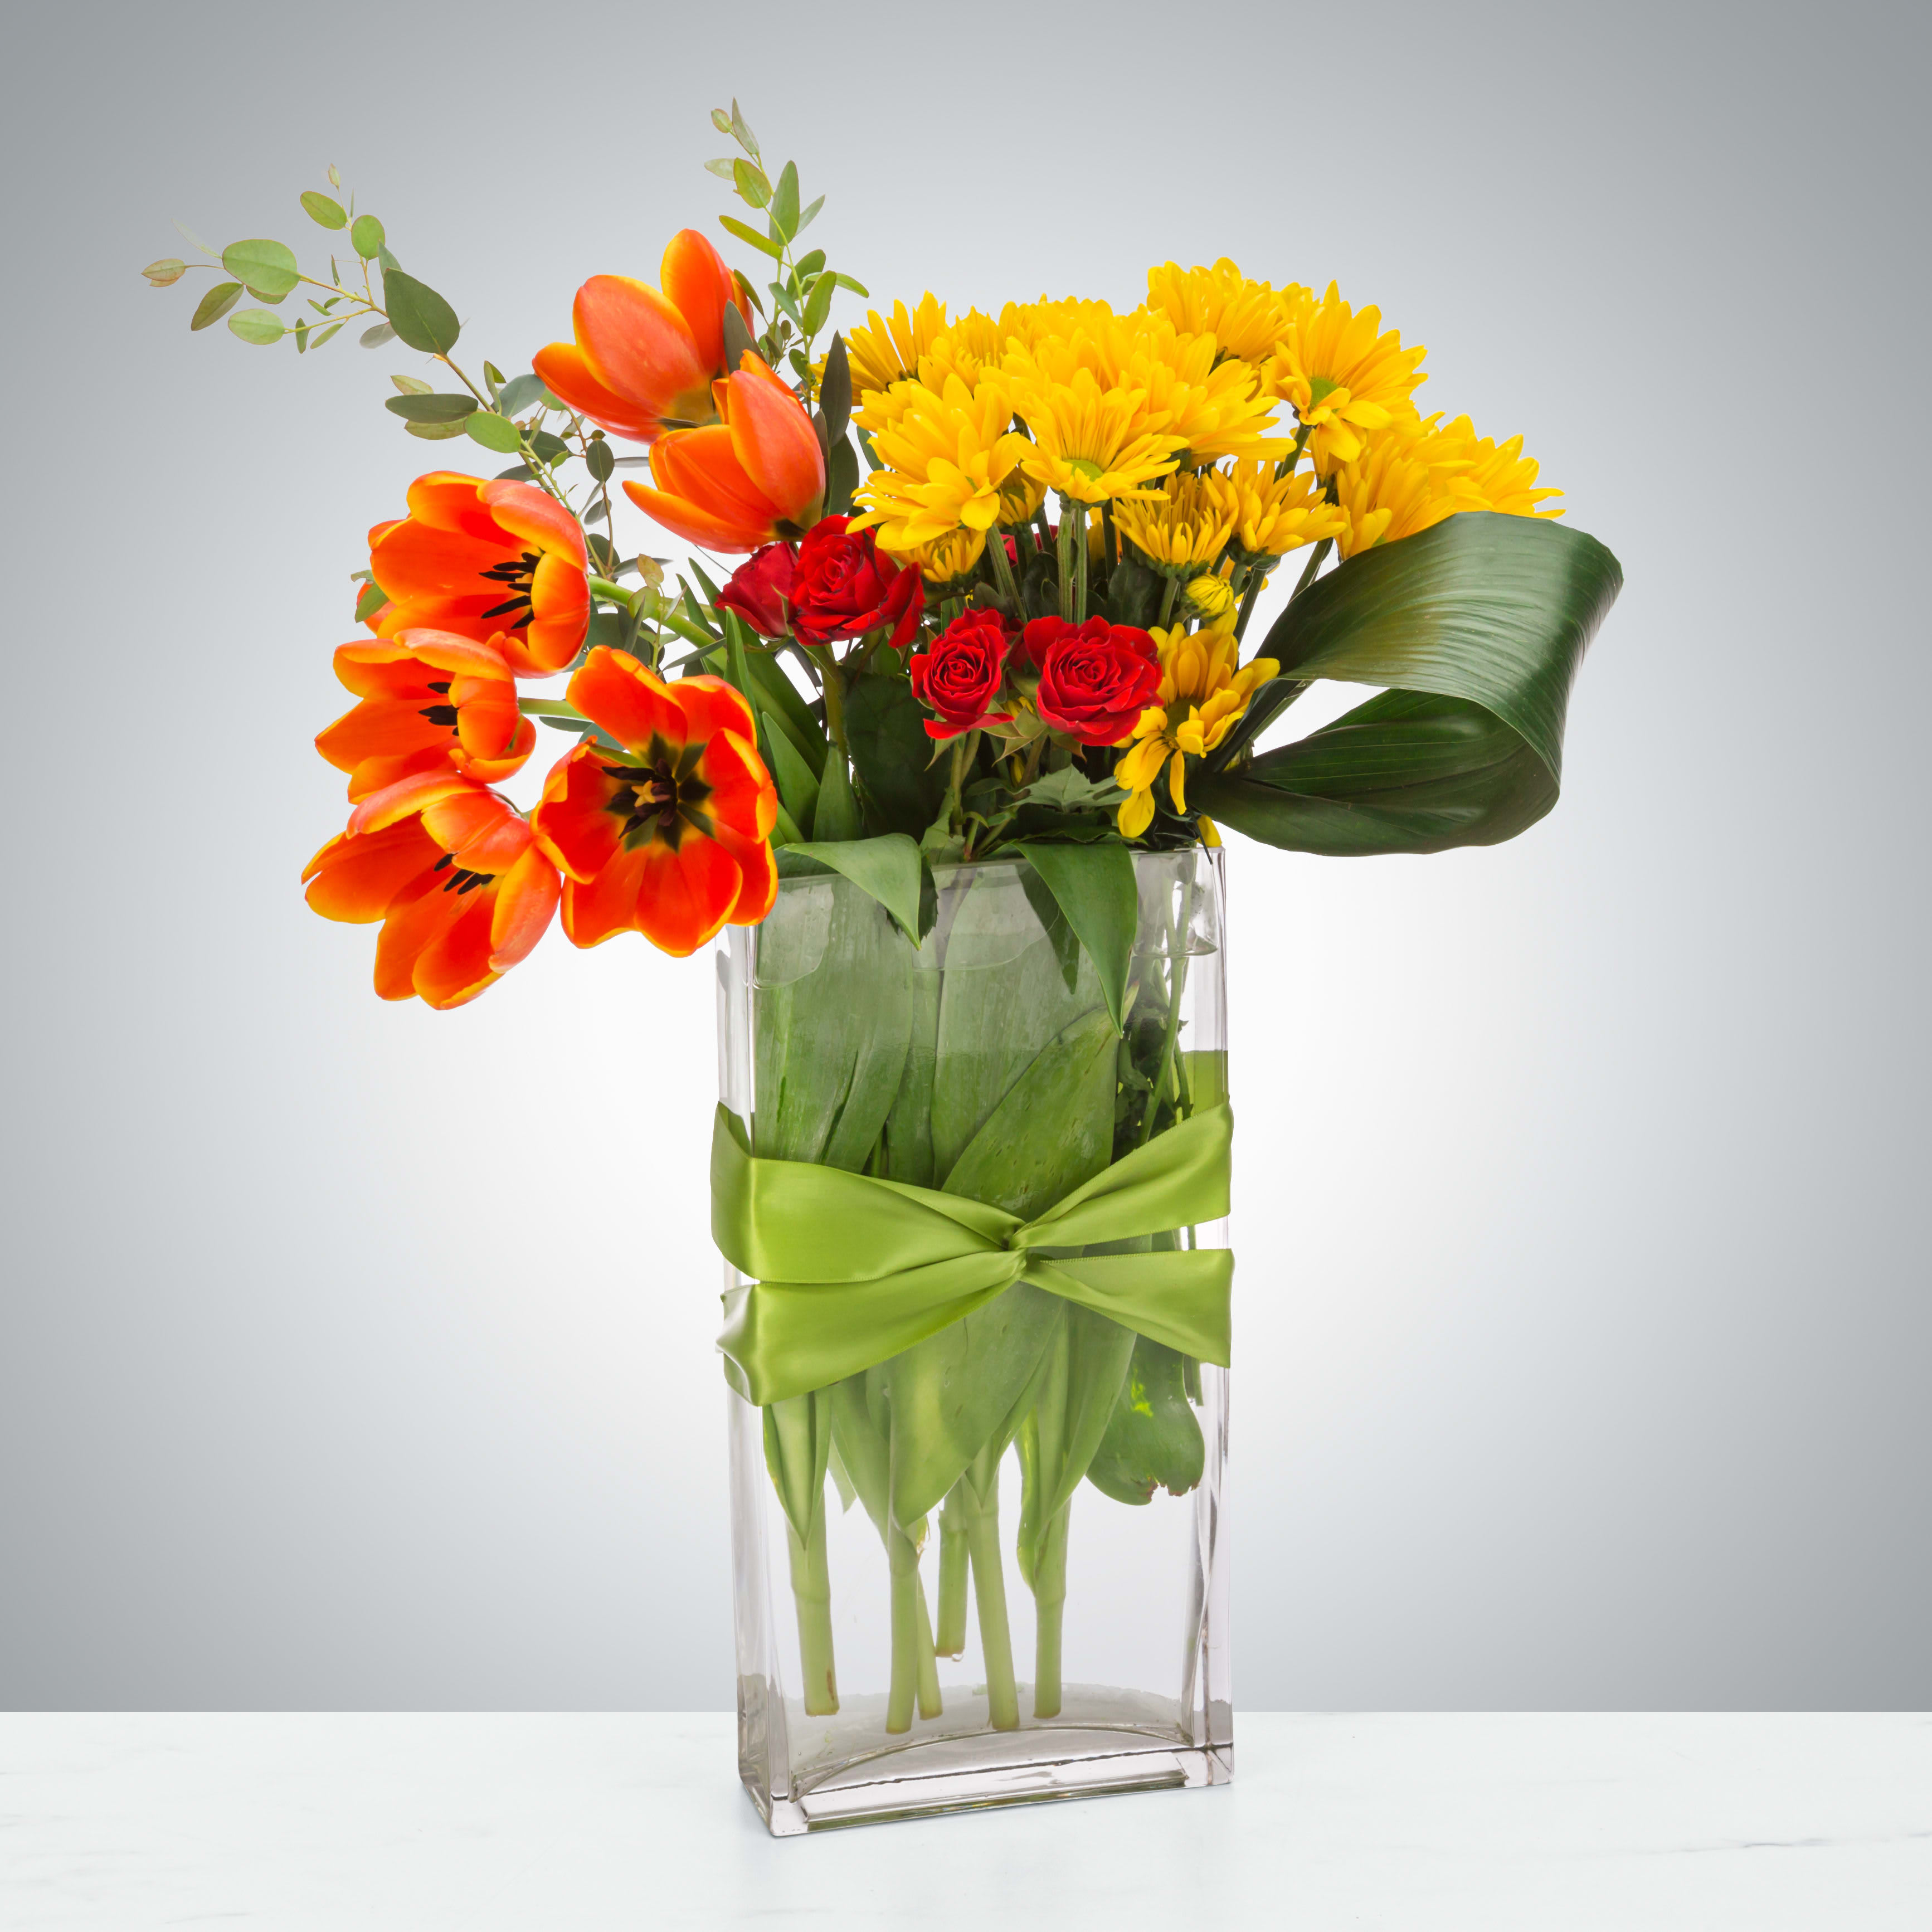 Make it Cozy by BloomNation™ - An elegant arrangement featuring daisy mums, tulips, and spray roses with a ribbon-wrapped vase, this arrangement would be a great gift for any occasion. Send it to celebrate somebody getting a new job, to your mom as a surprise gift, or to beat the winter doldrums.  Approximate Dimensions: 12&quot;D x 16&quot;H